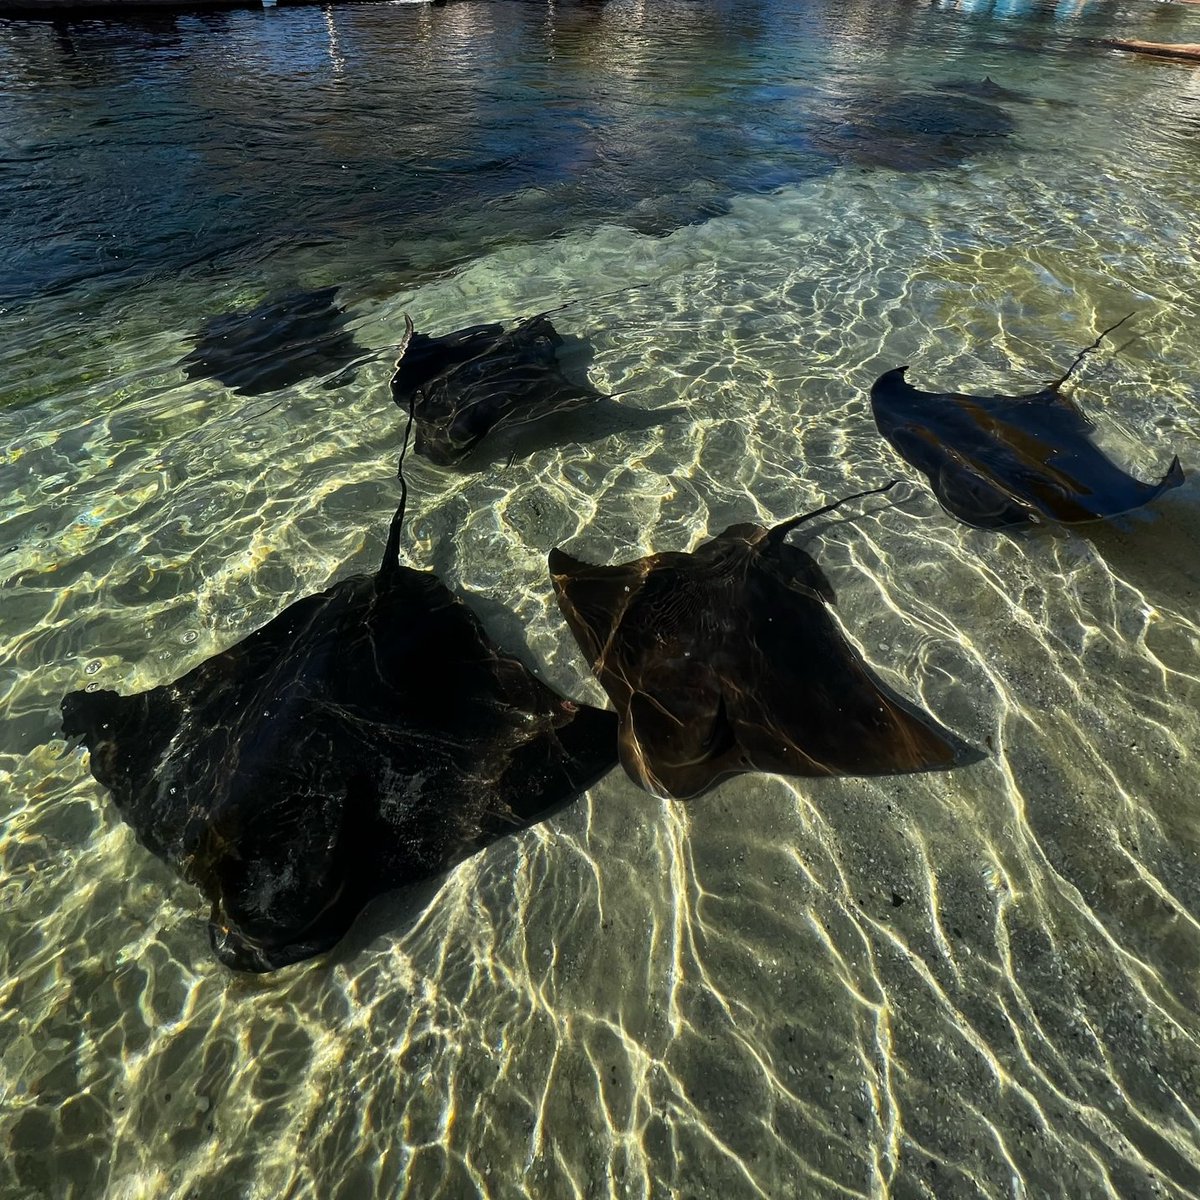 it's a beautiful day here in #PortStephens today and our are rays enjoying the sunshine ☀️💙 book now to come get up close with these beauties!

#RayEncounters #visitNSW #IncredibleByNature